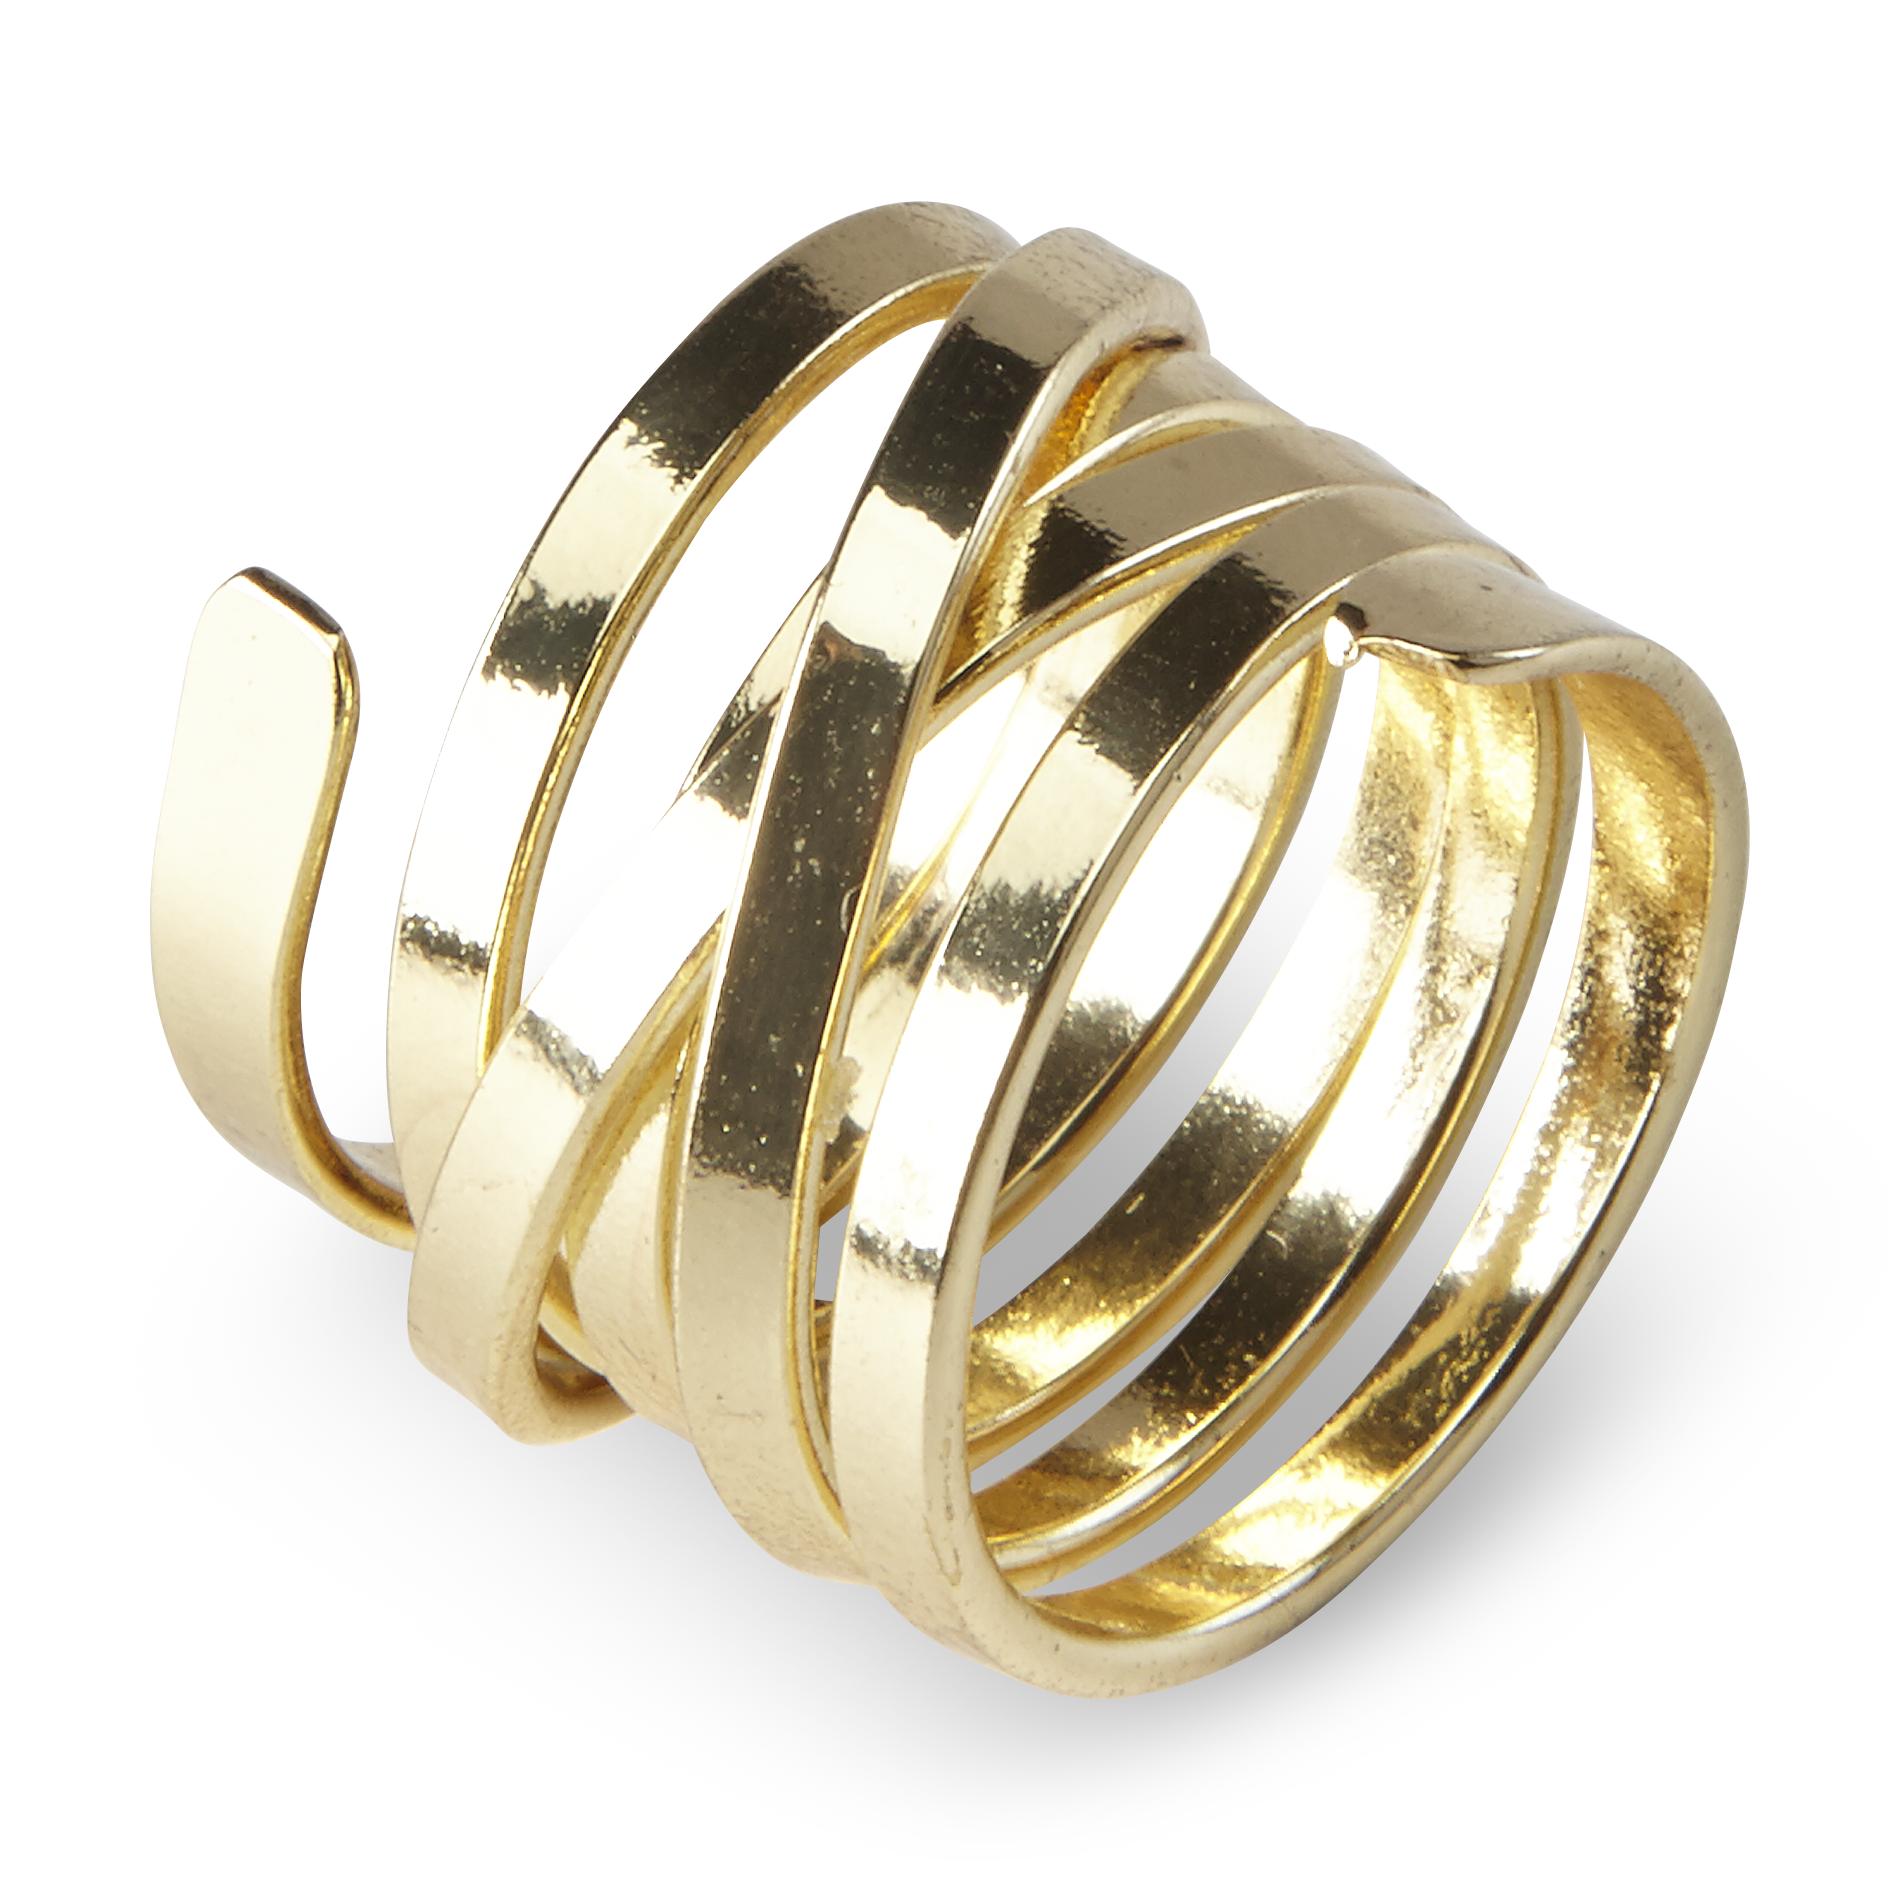 Attention Women's Goldtone Coil Ring